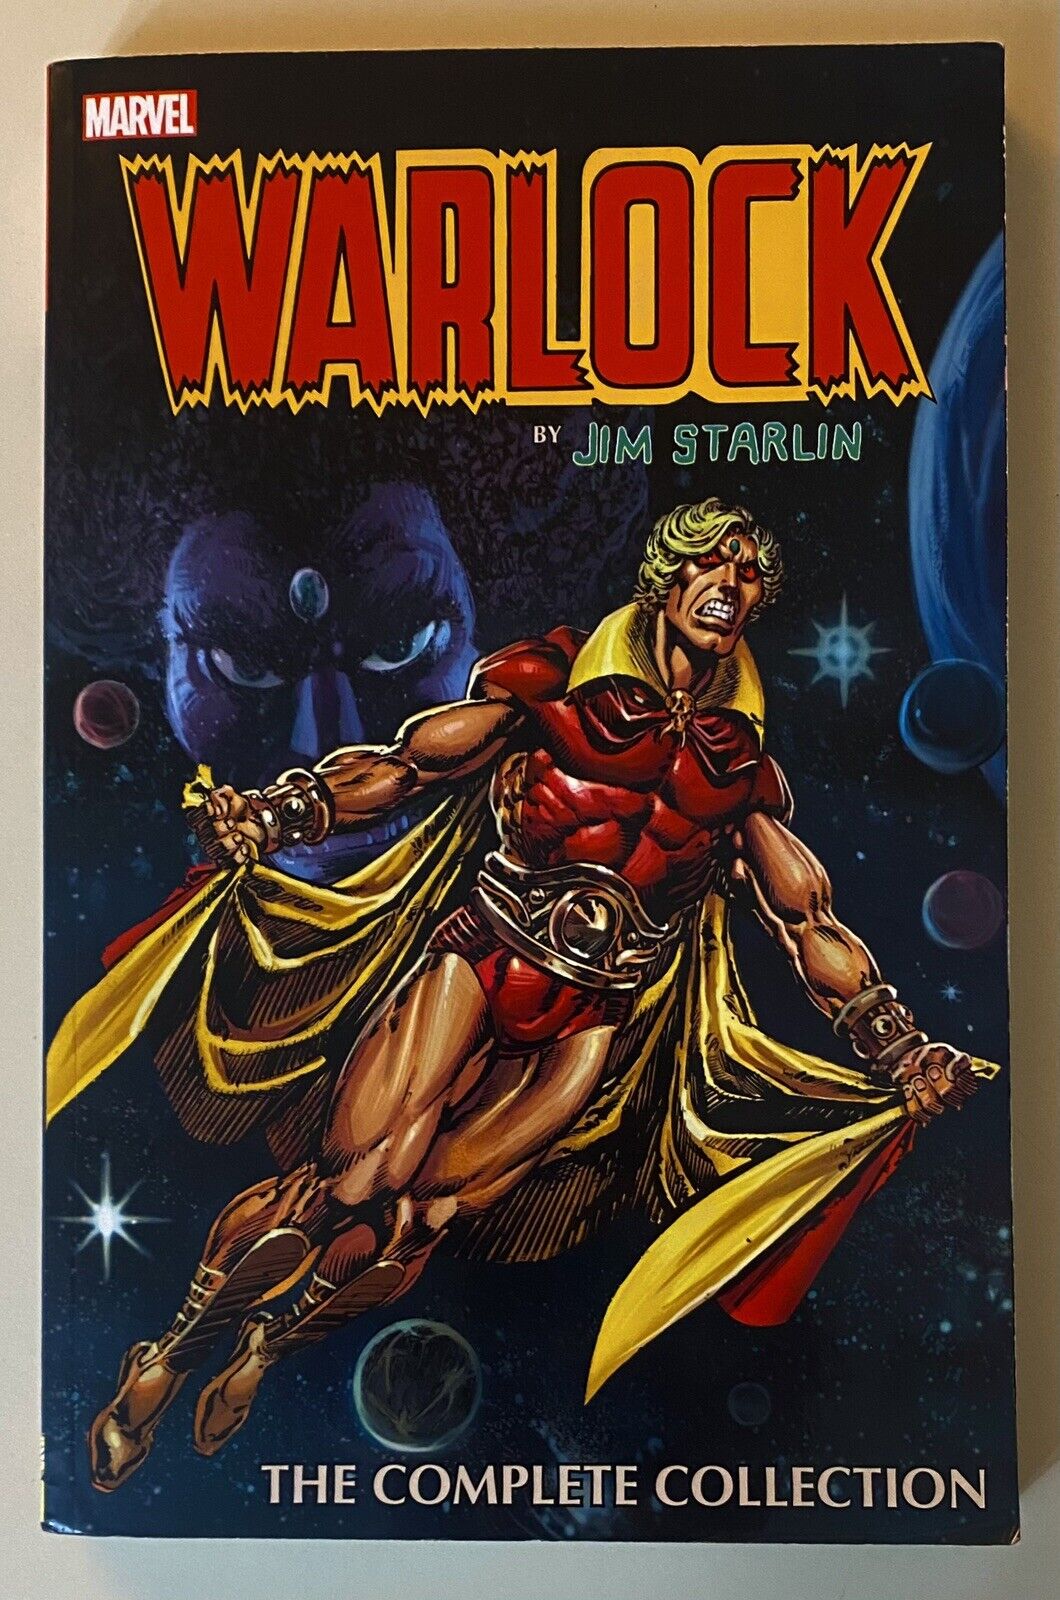 Warlock by Jim Starlin: The Complete Collection (Marvel, 2014)